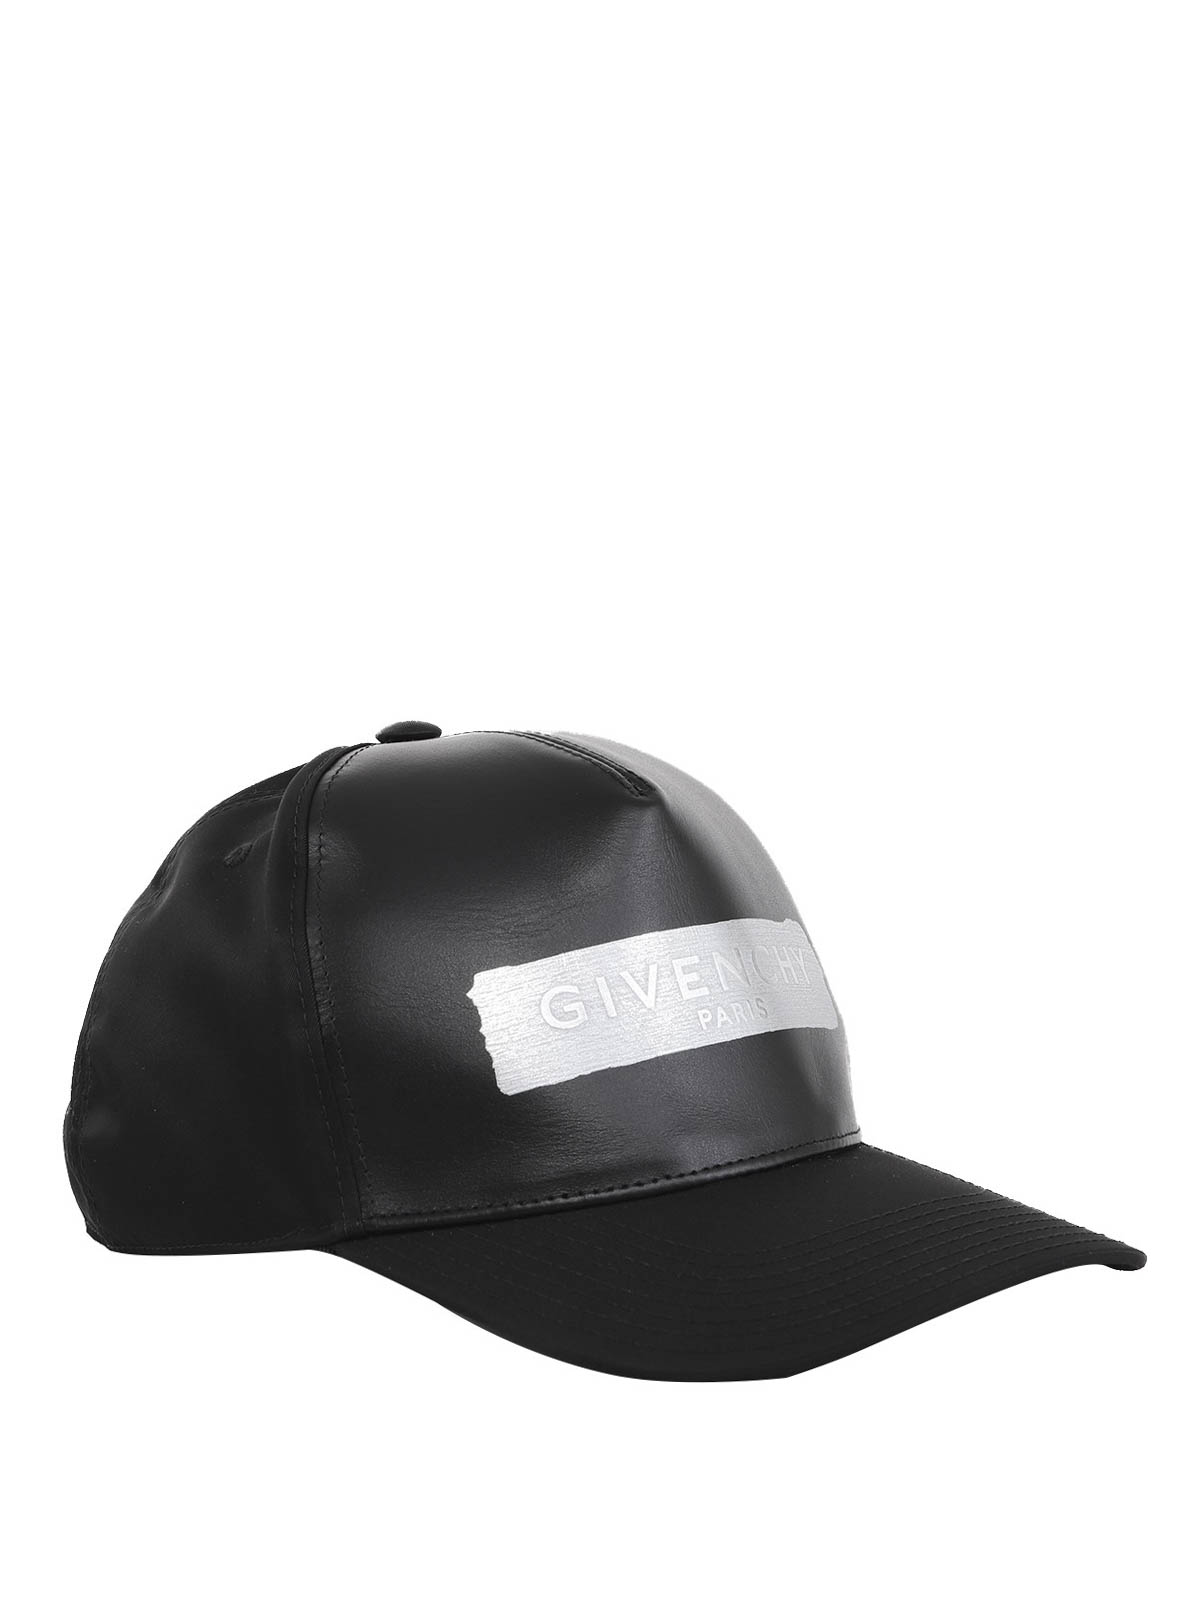 Hats & caps Givenchy - Logo tape leather baseball cap - BPZ003P09Y001